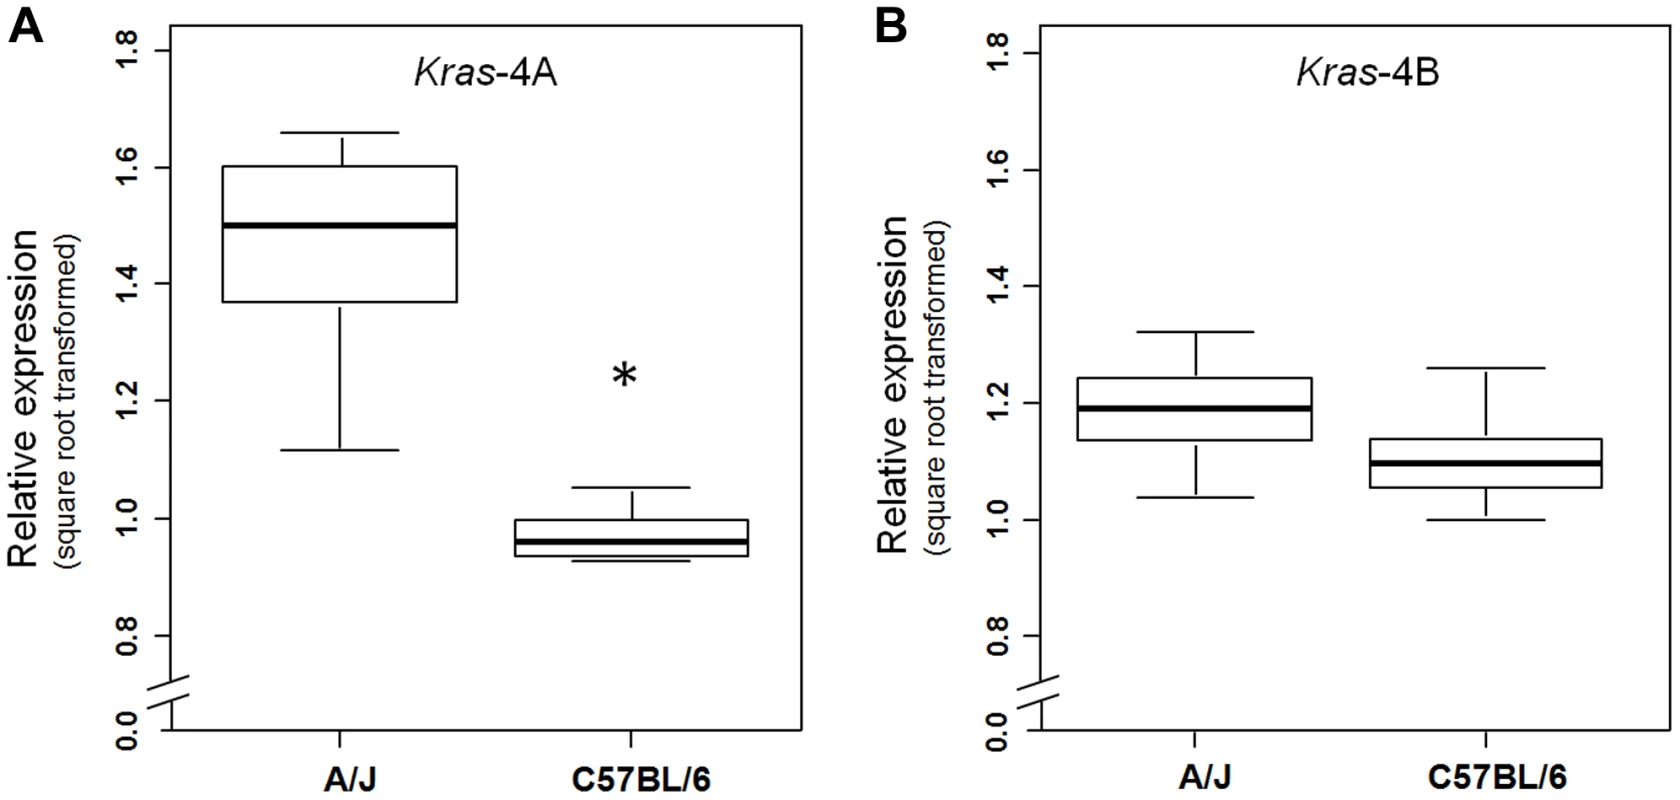 <i>Kras</i>-4A is expressed at higher levels in susceptible (A/J) than resistant (C57BL/6) strains.